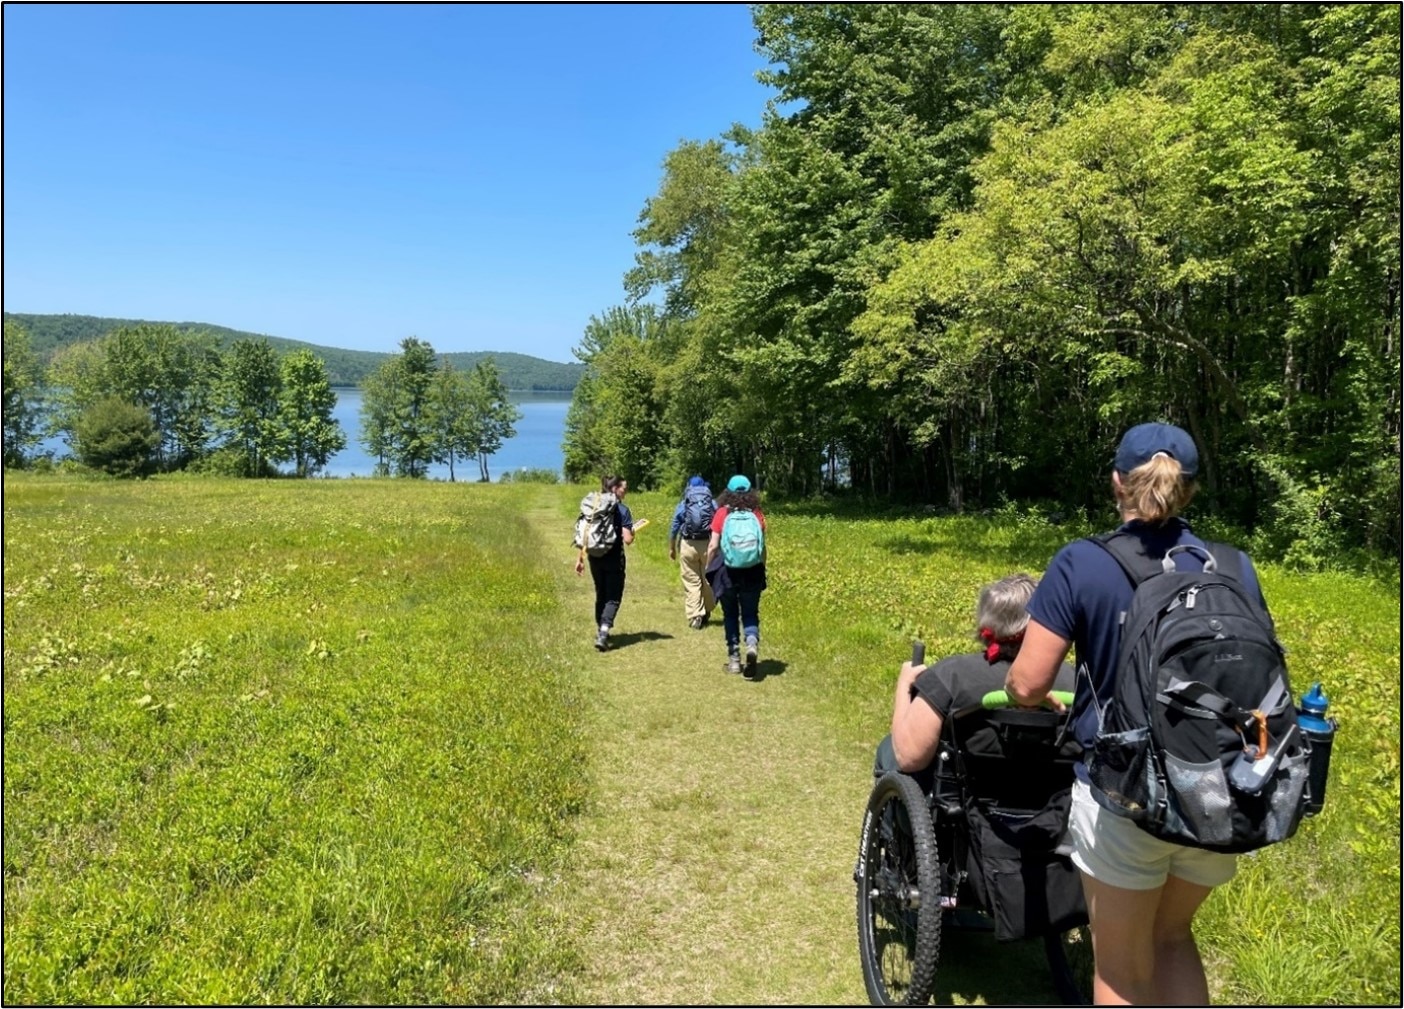 A group of hikers are walking towards a blue lake along a trail through a green meadow.  One person using a wheelchair is being pushed and 3 people are walking in front with back packs.  It's a sunny day and the meadow is surrounded by green trees.  